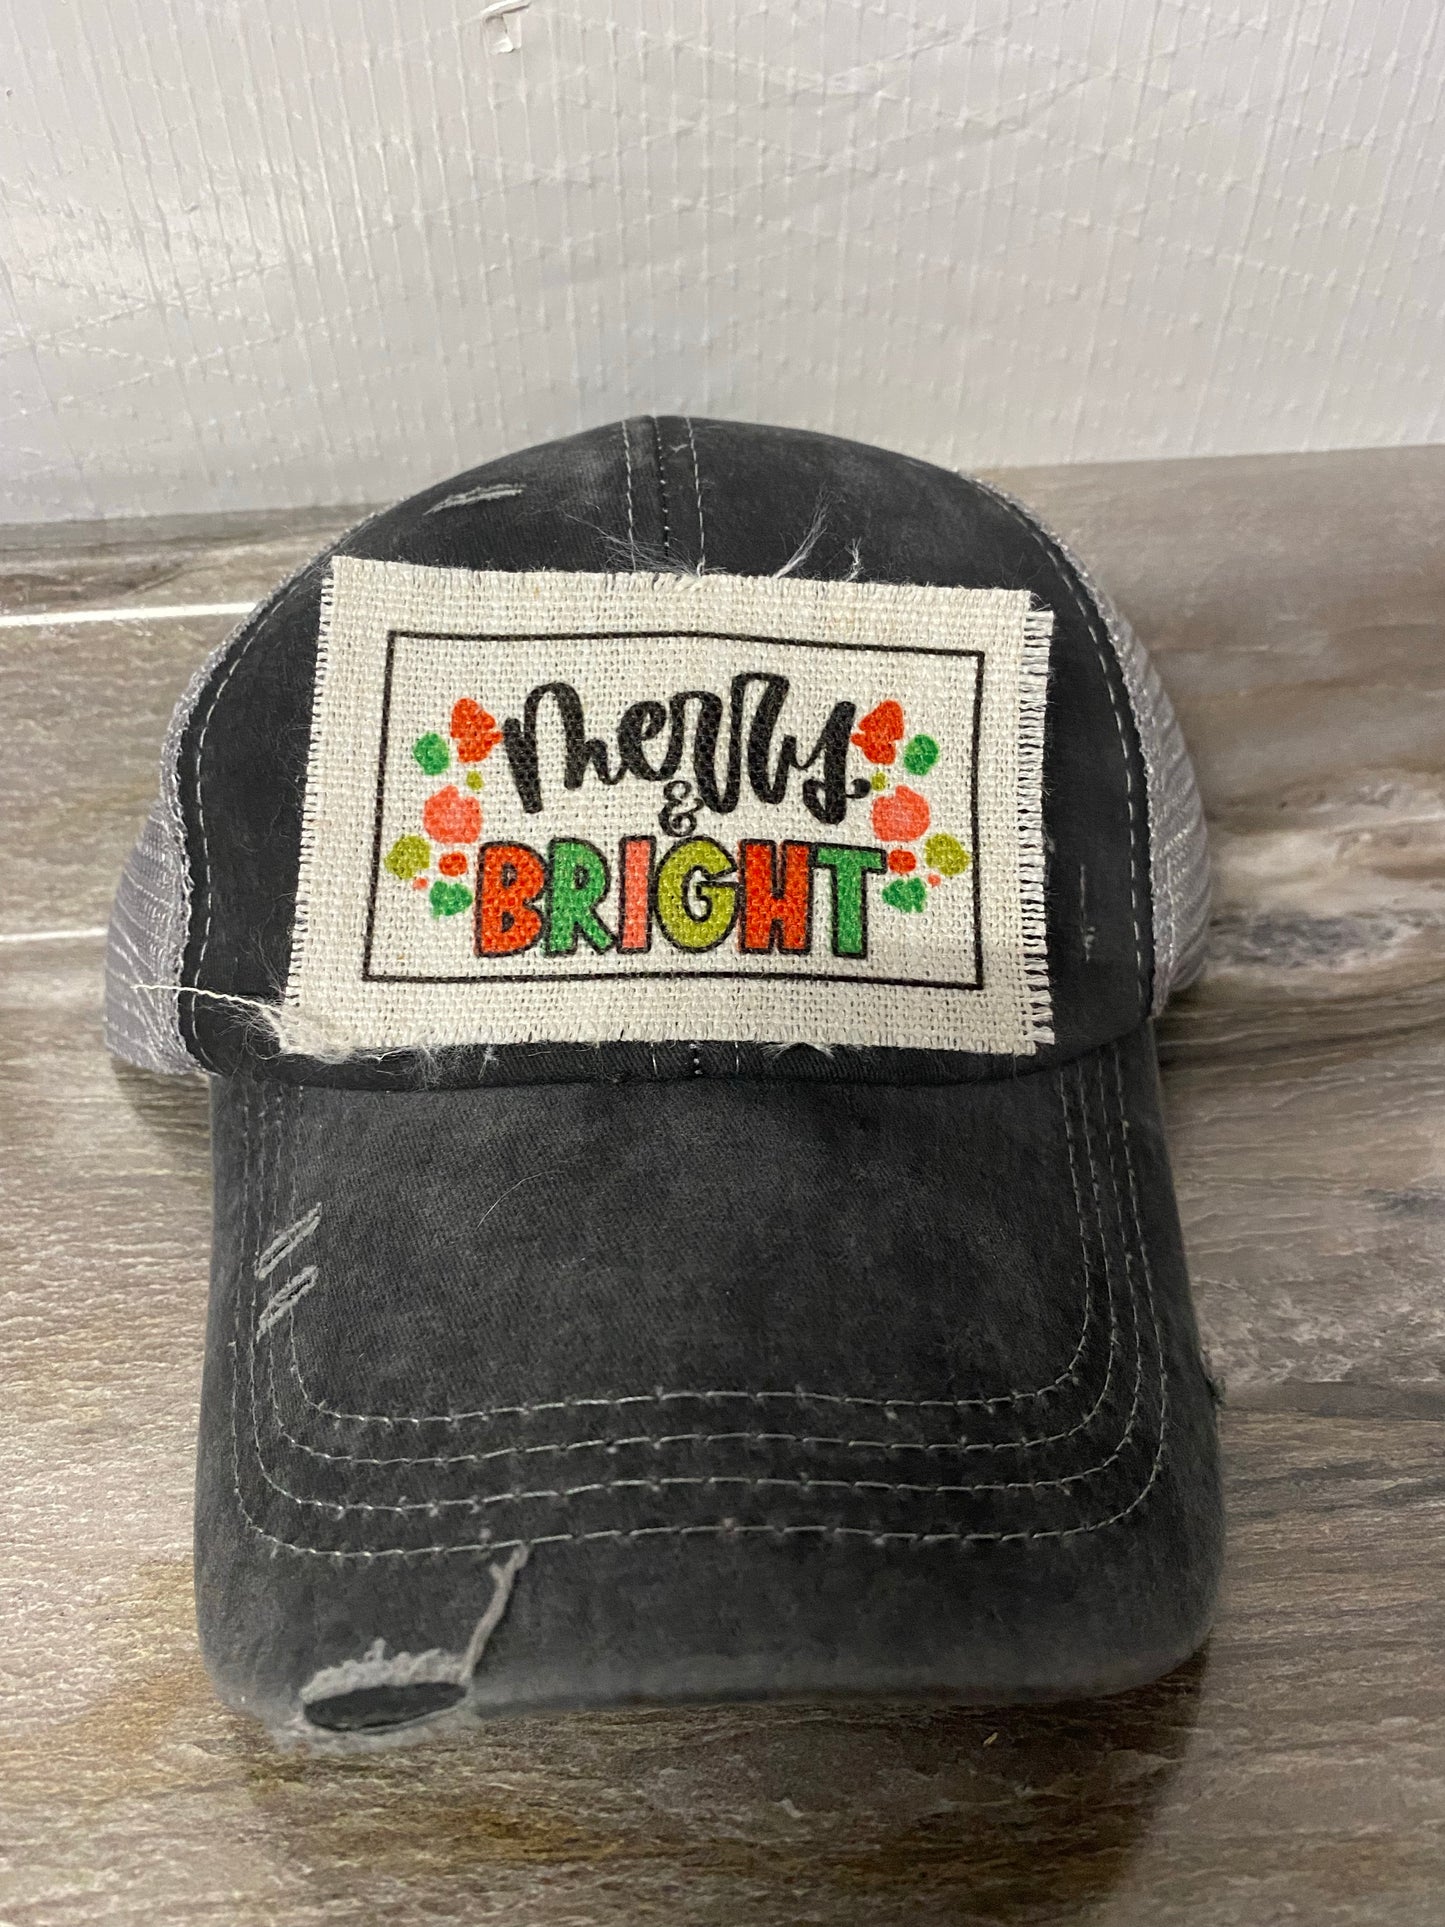 Merry & Bright with leopard spots Hat Patch